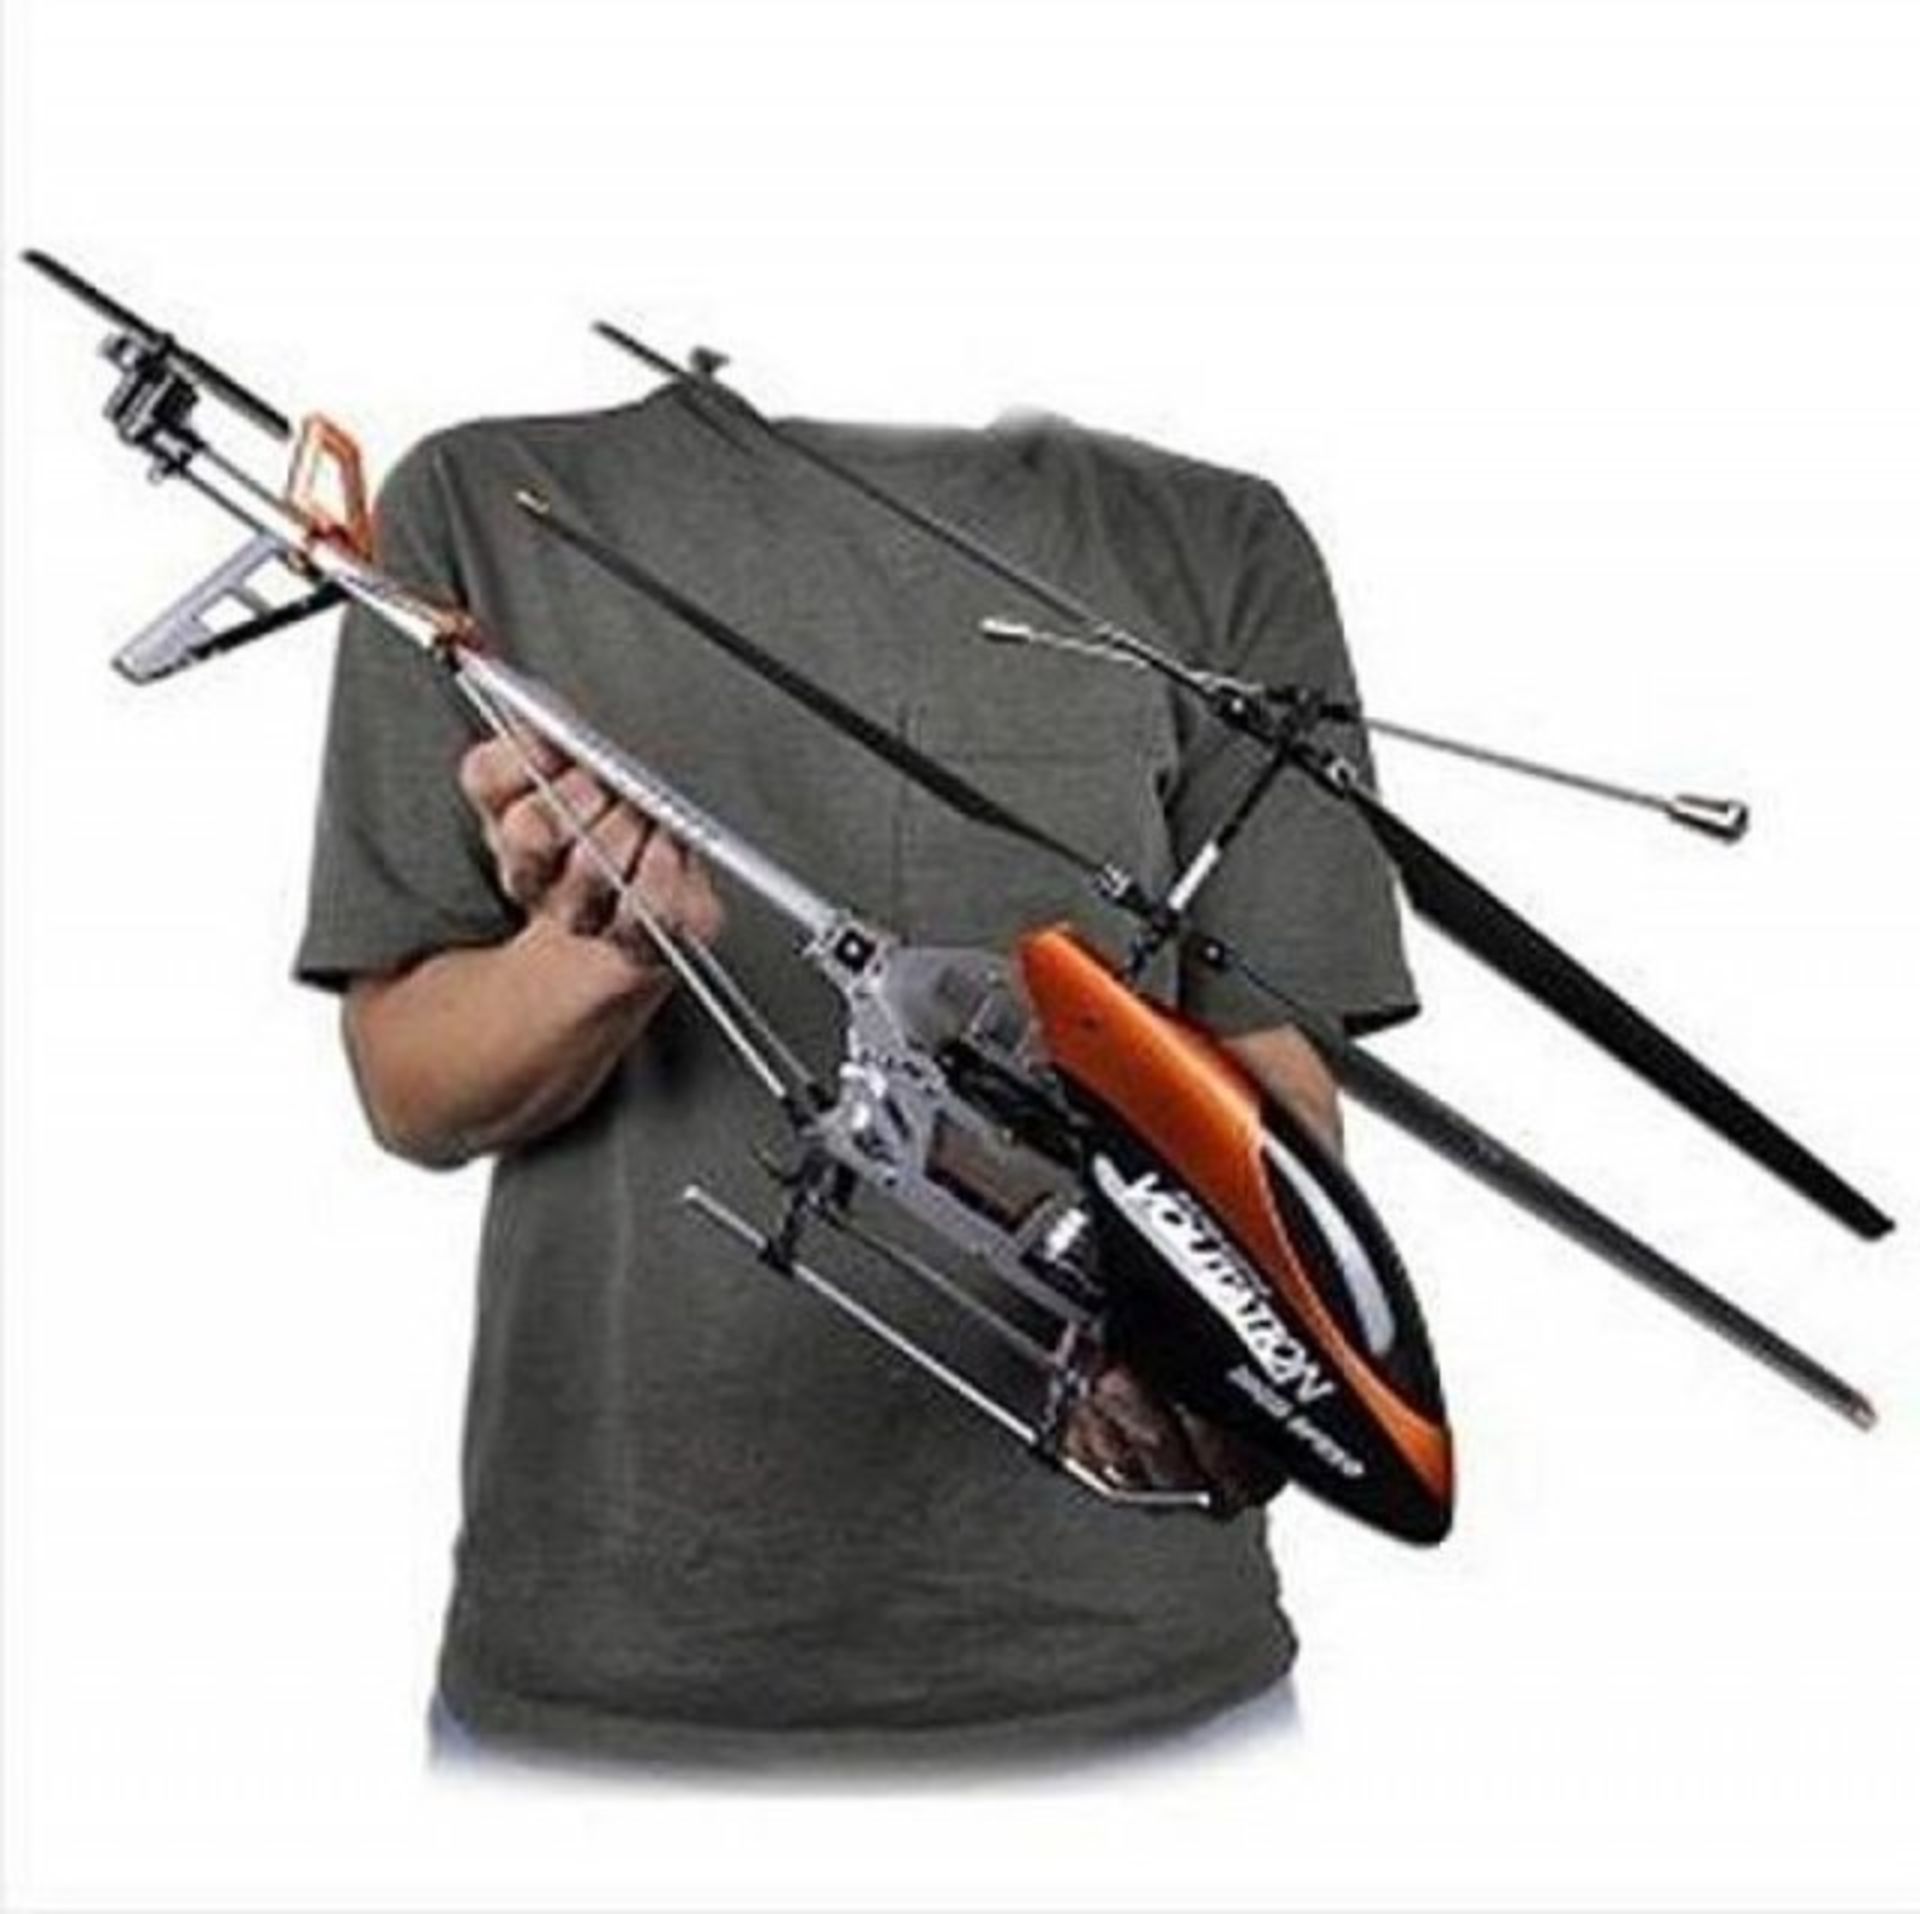 V *TRADE QTY* Brand New Volcano High Speed Radio Control Helicopter (Large) with R/C Unit